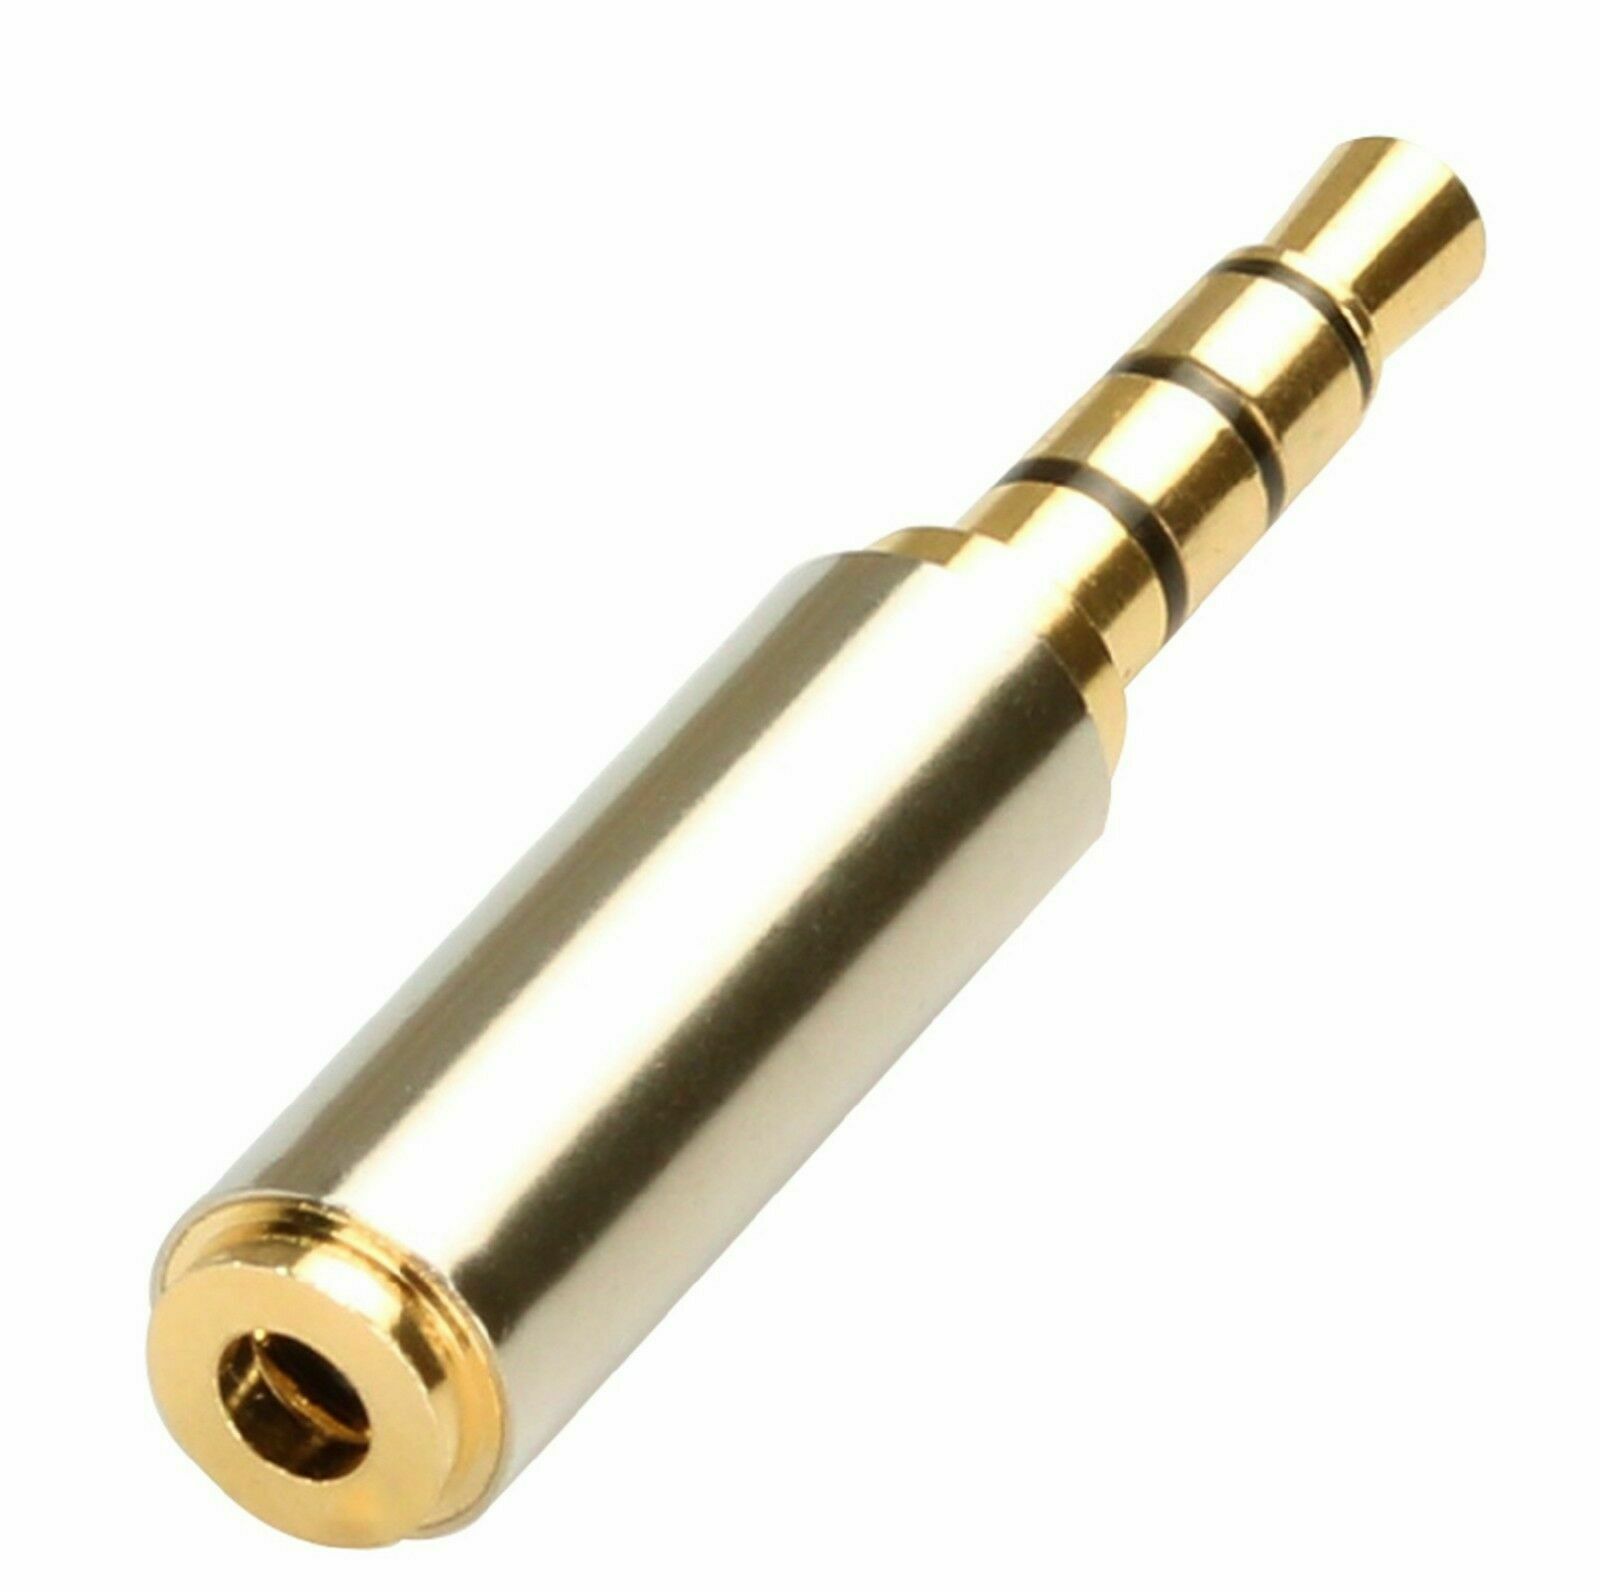 Gold 2.5mm Female To 3.5mm Male Stereo Audio Headphone Jack Adapter Converter